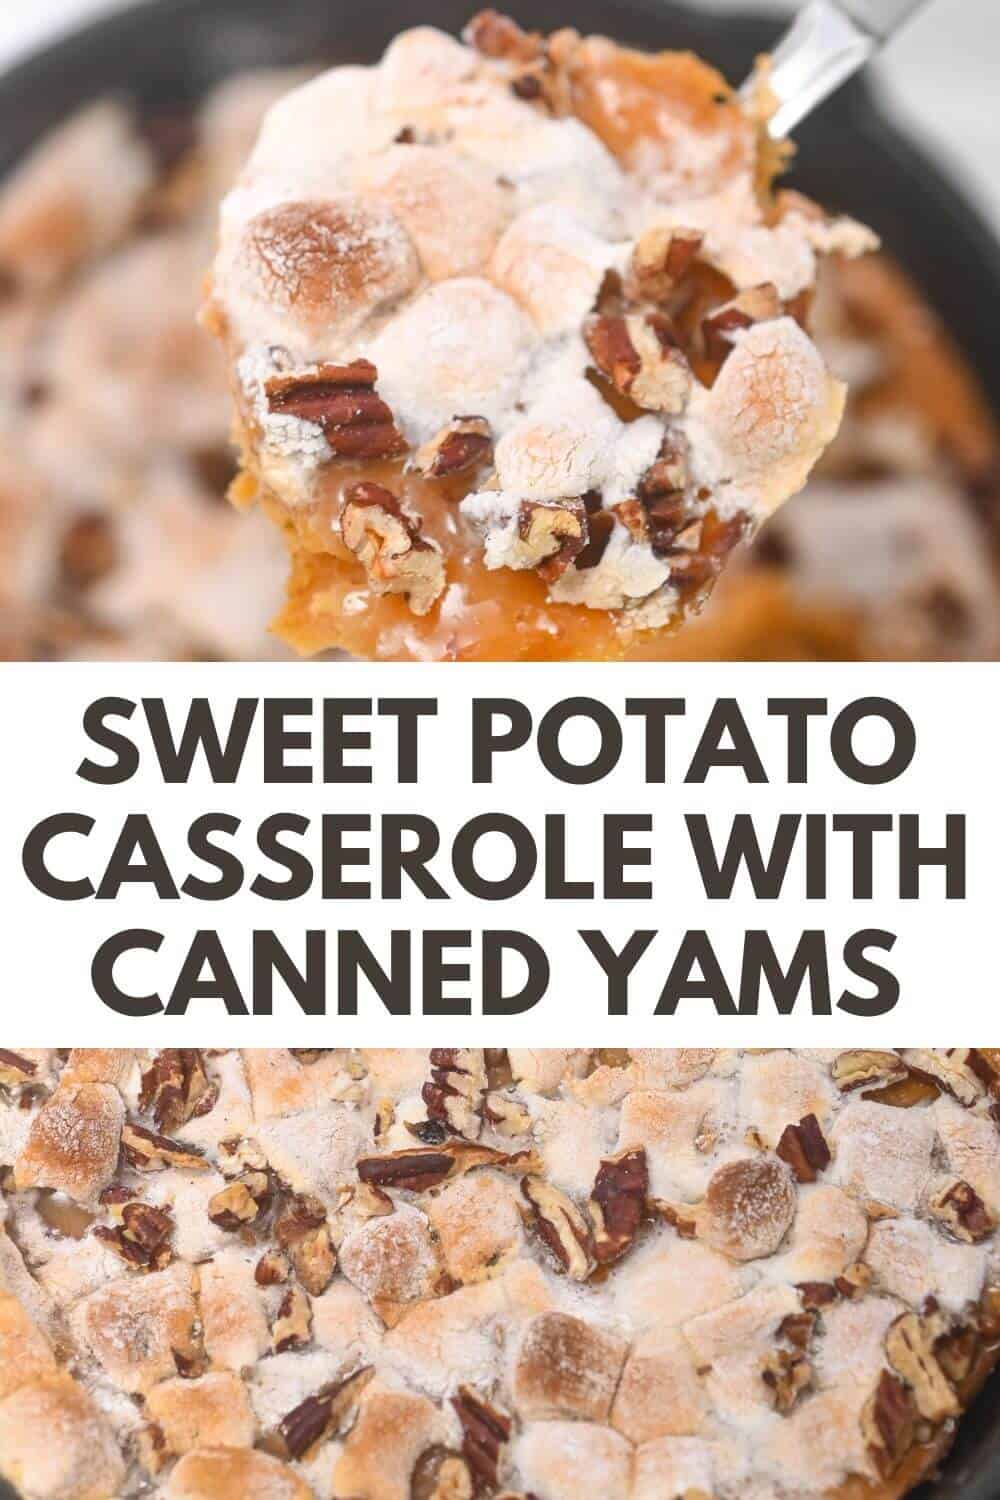 Sweet potato casserole featuring the use of canned yams.